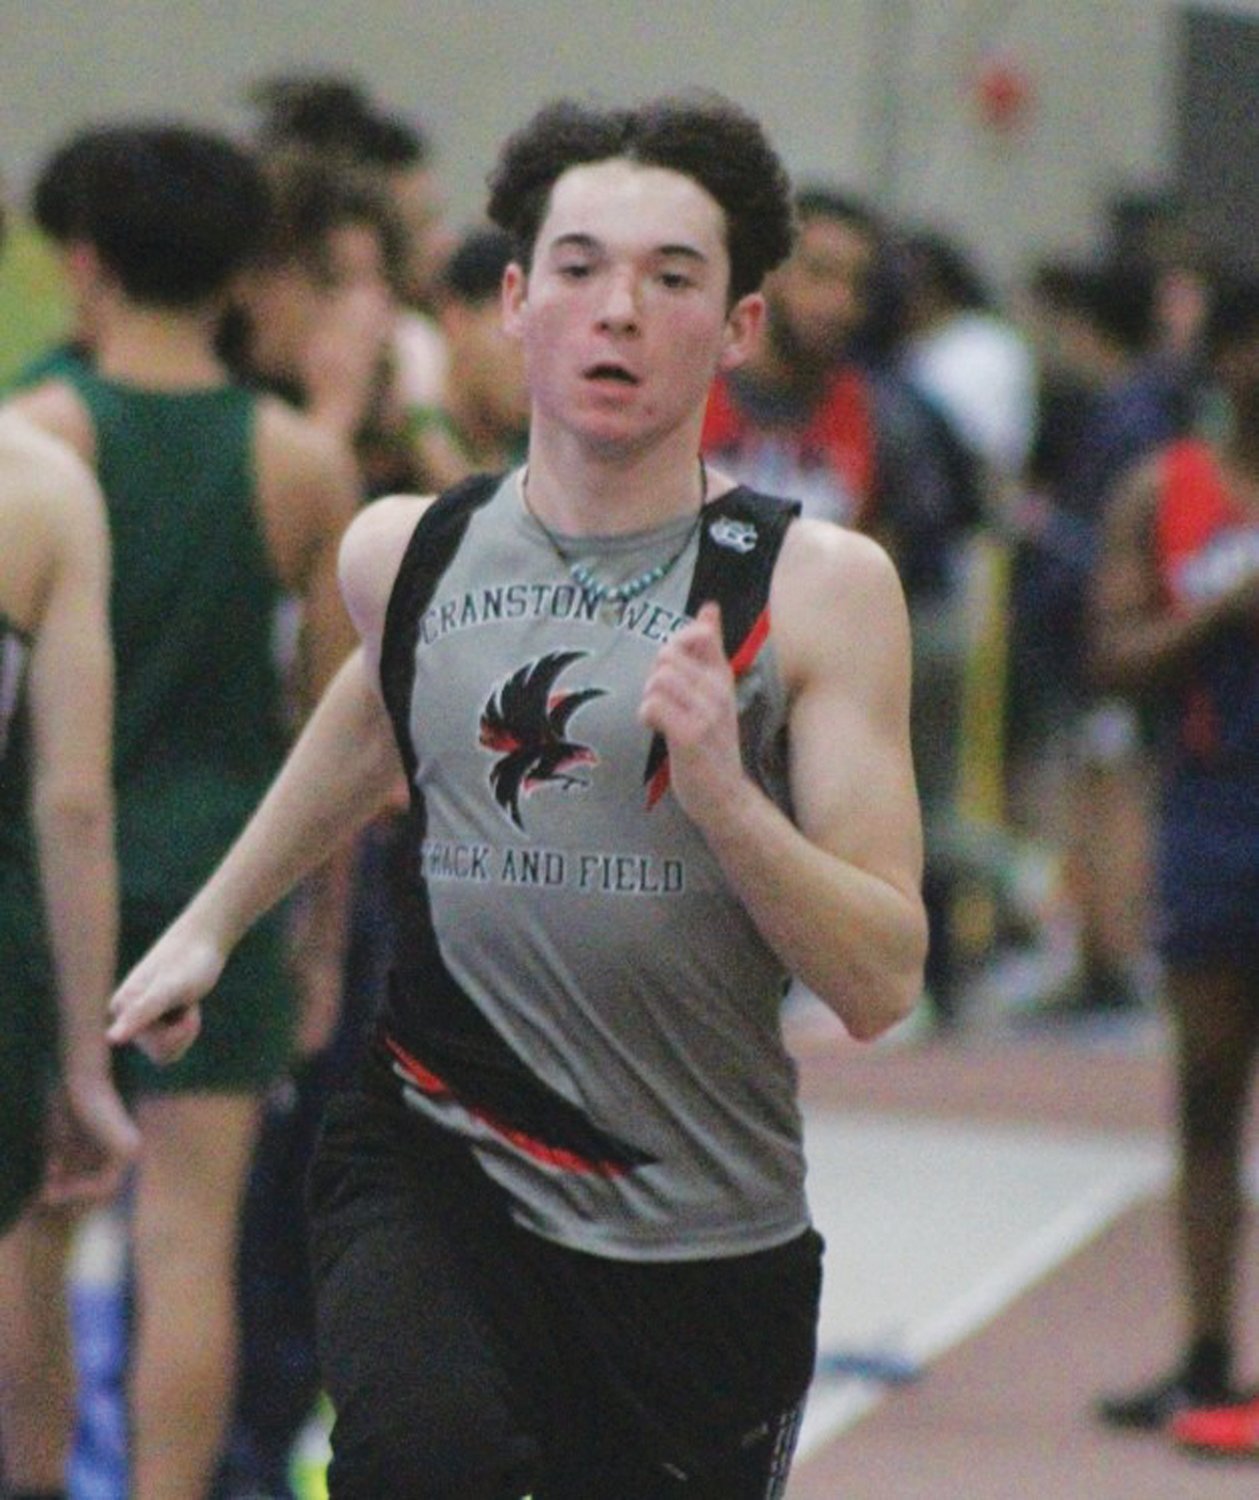 BEST FOOT FORWARD: West’s Aiden Robinson races up the track.